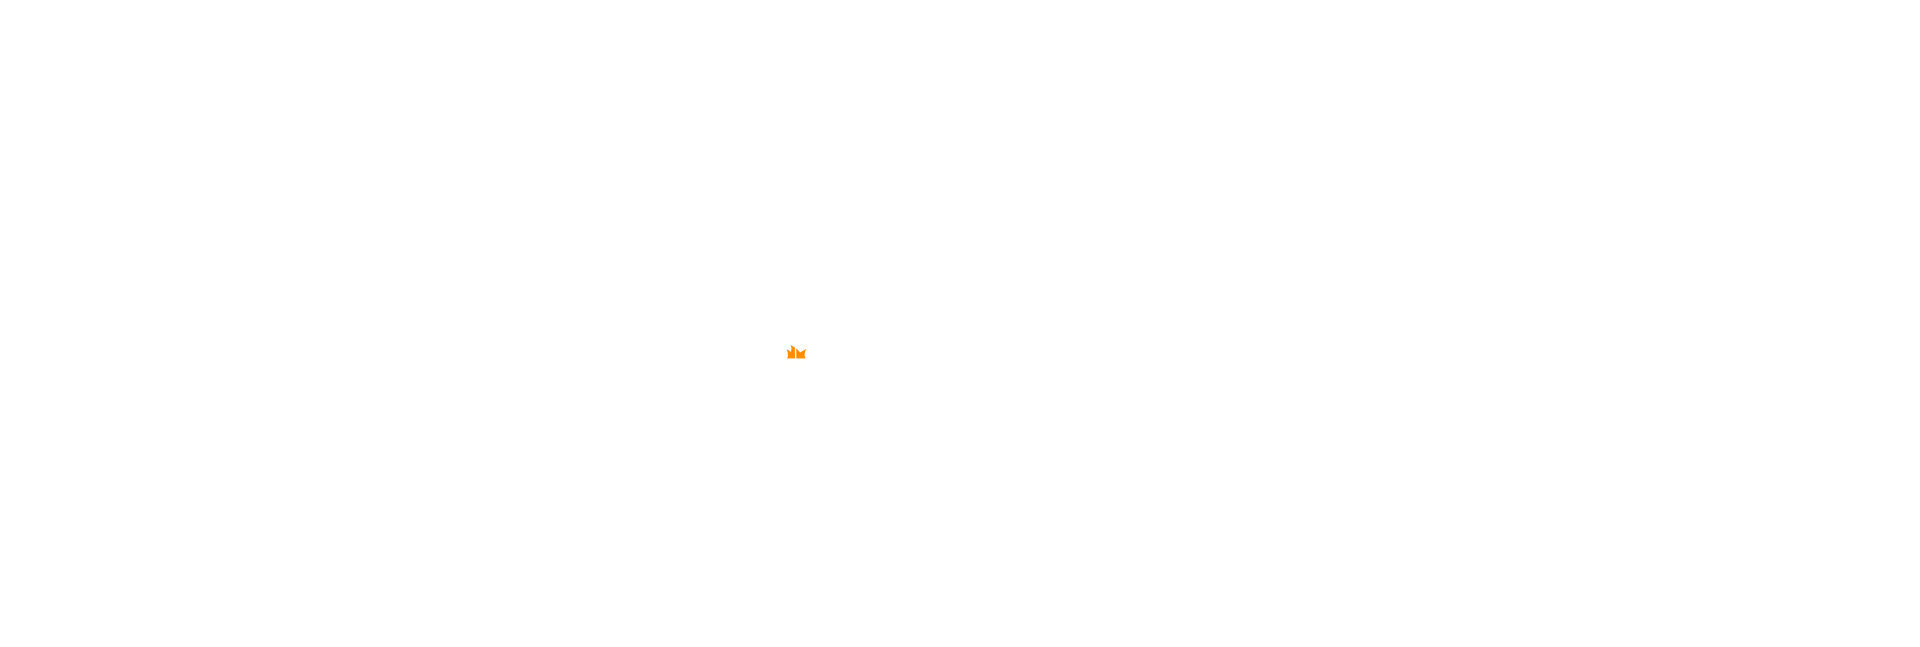 The Sieve and the Siphon